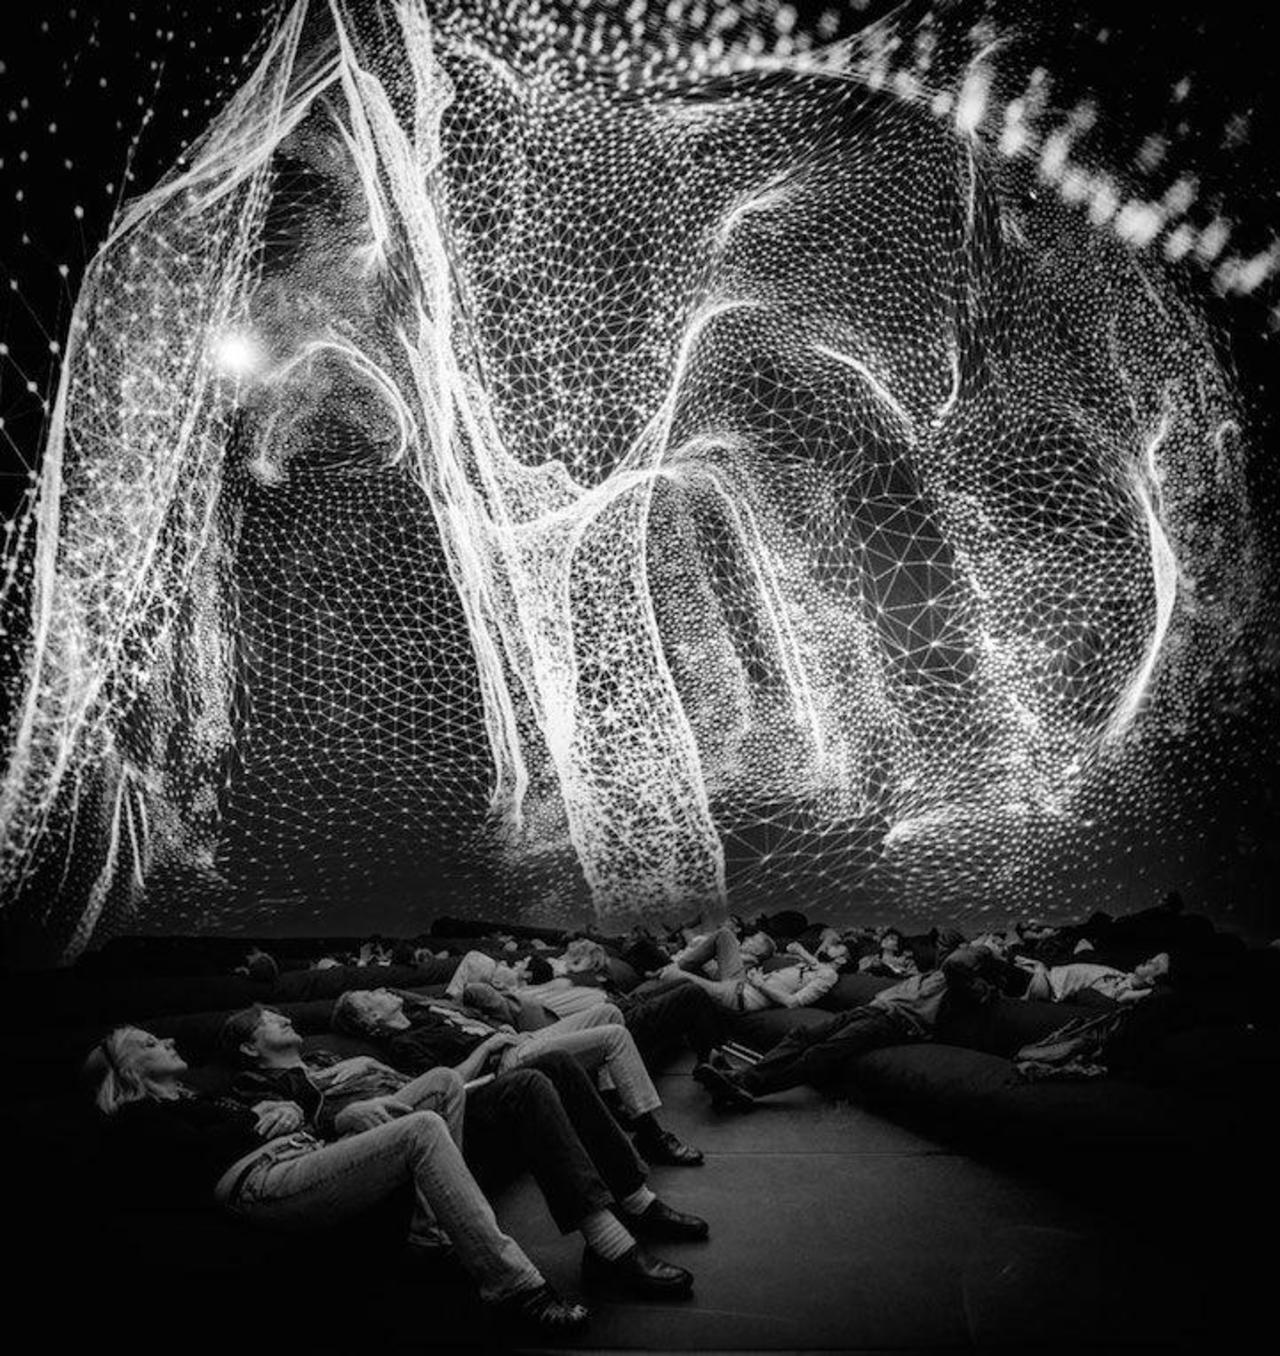 Projected 360° Installation 
By Joanie Lemercie
#Art #Installation http://t.co/RcY4j2IJv8